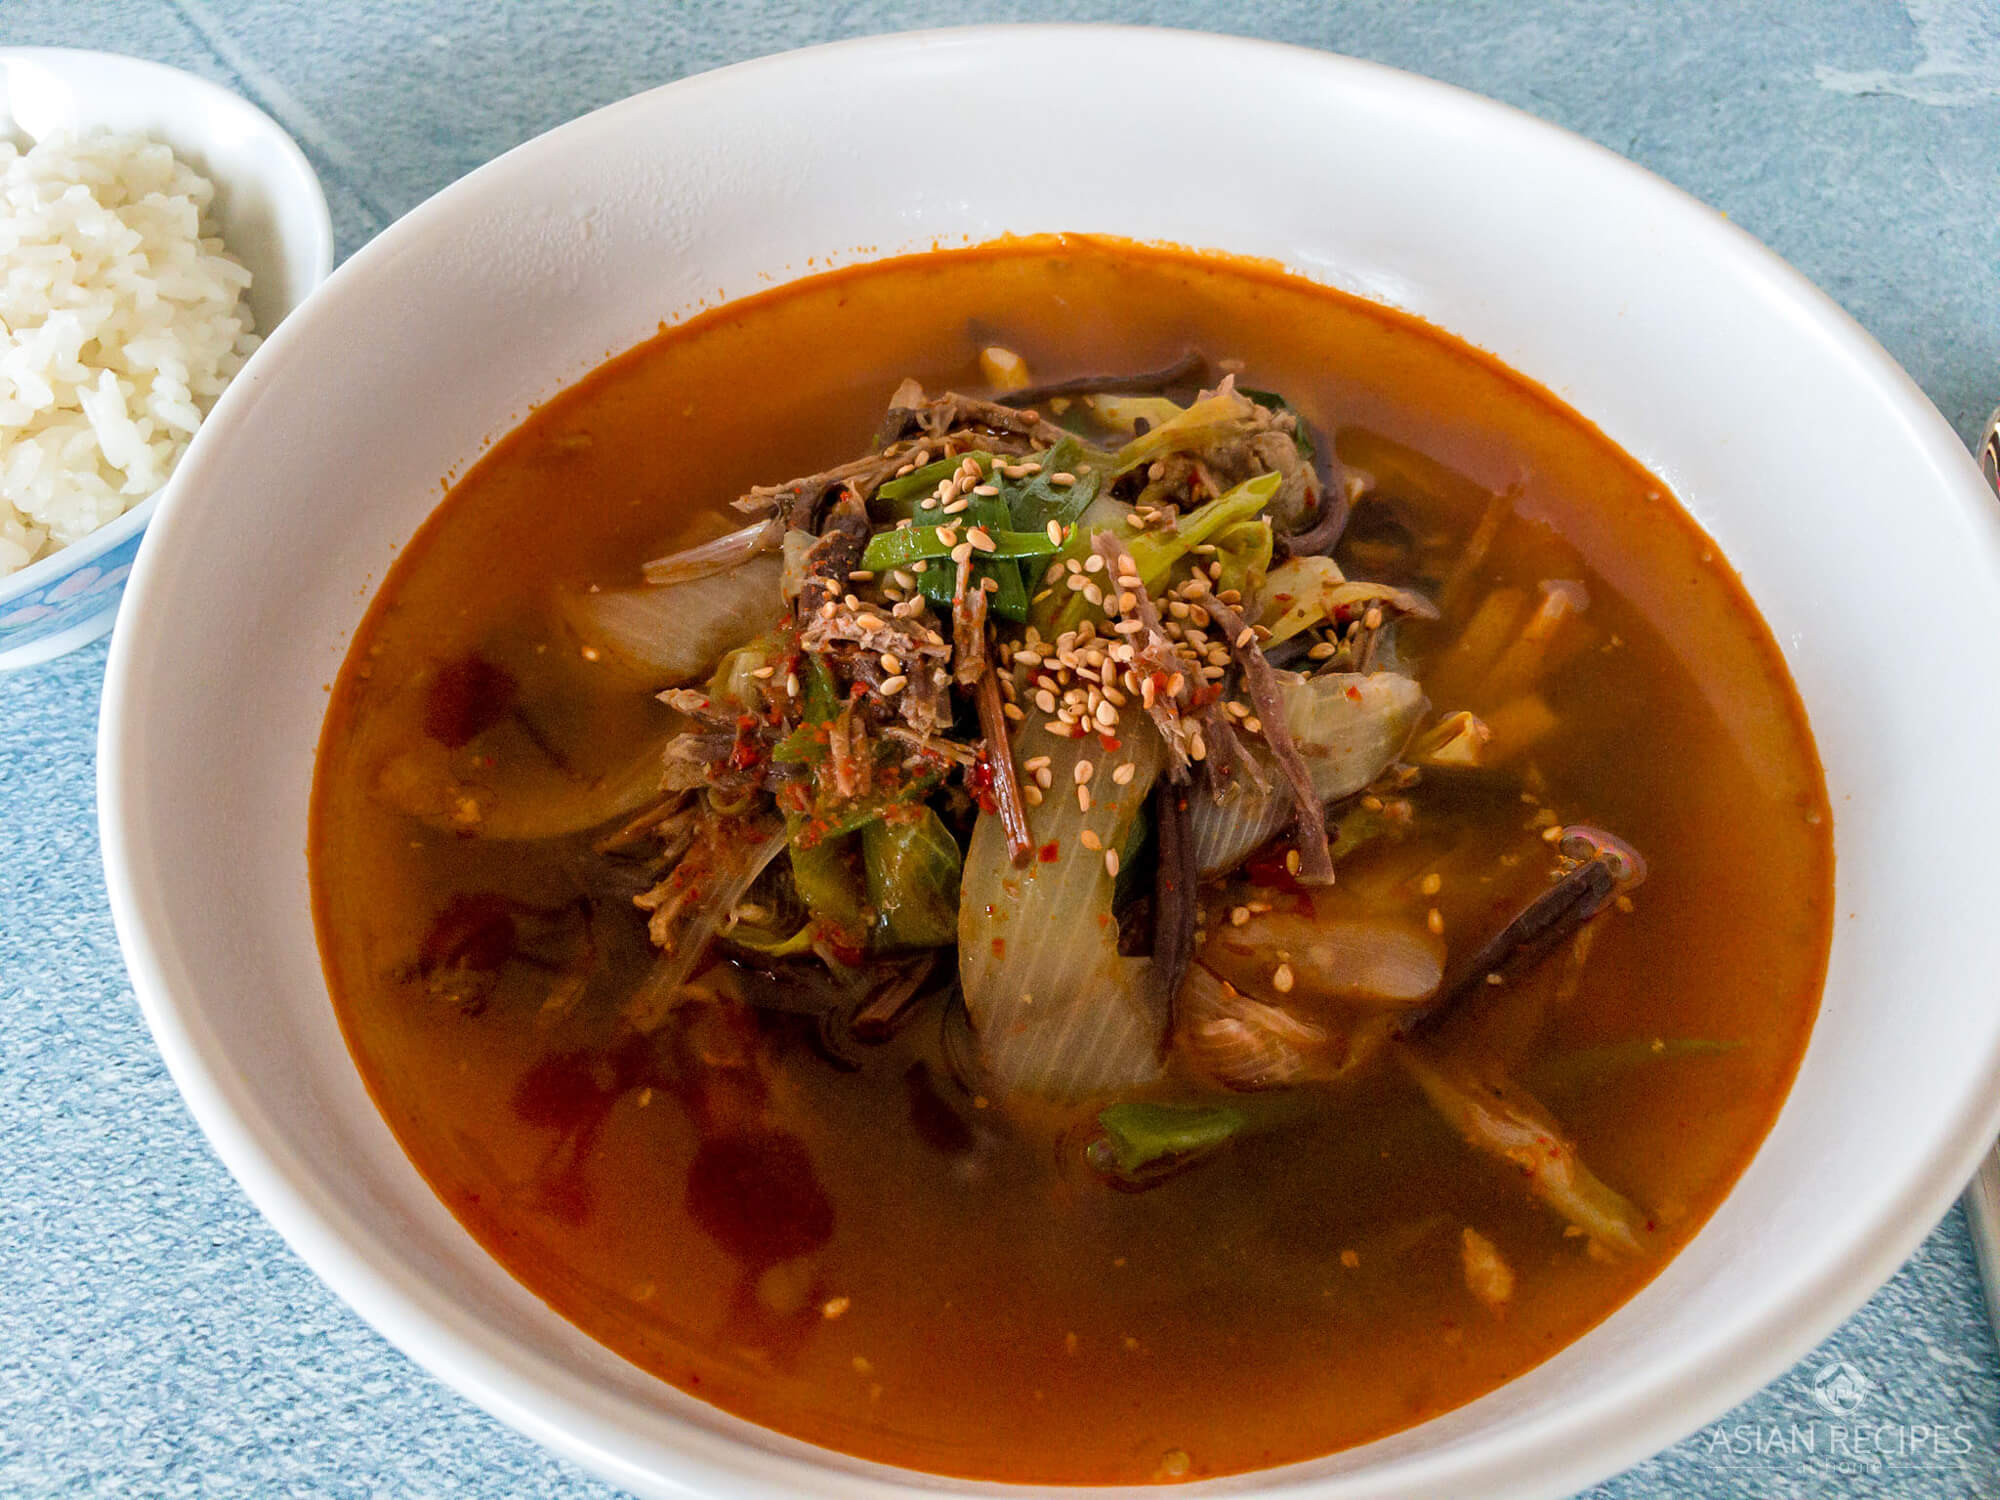 This Korean spicy stew recipe is filled with shredded beef, onions and fernbrake (gosari).